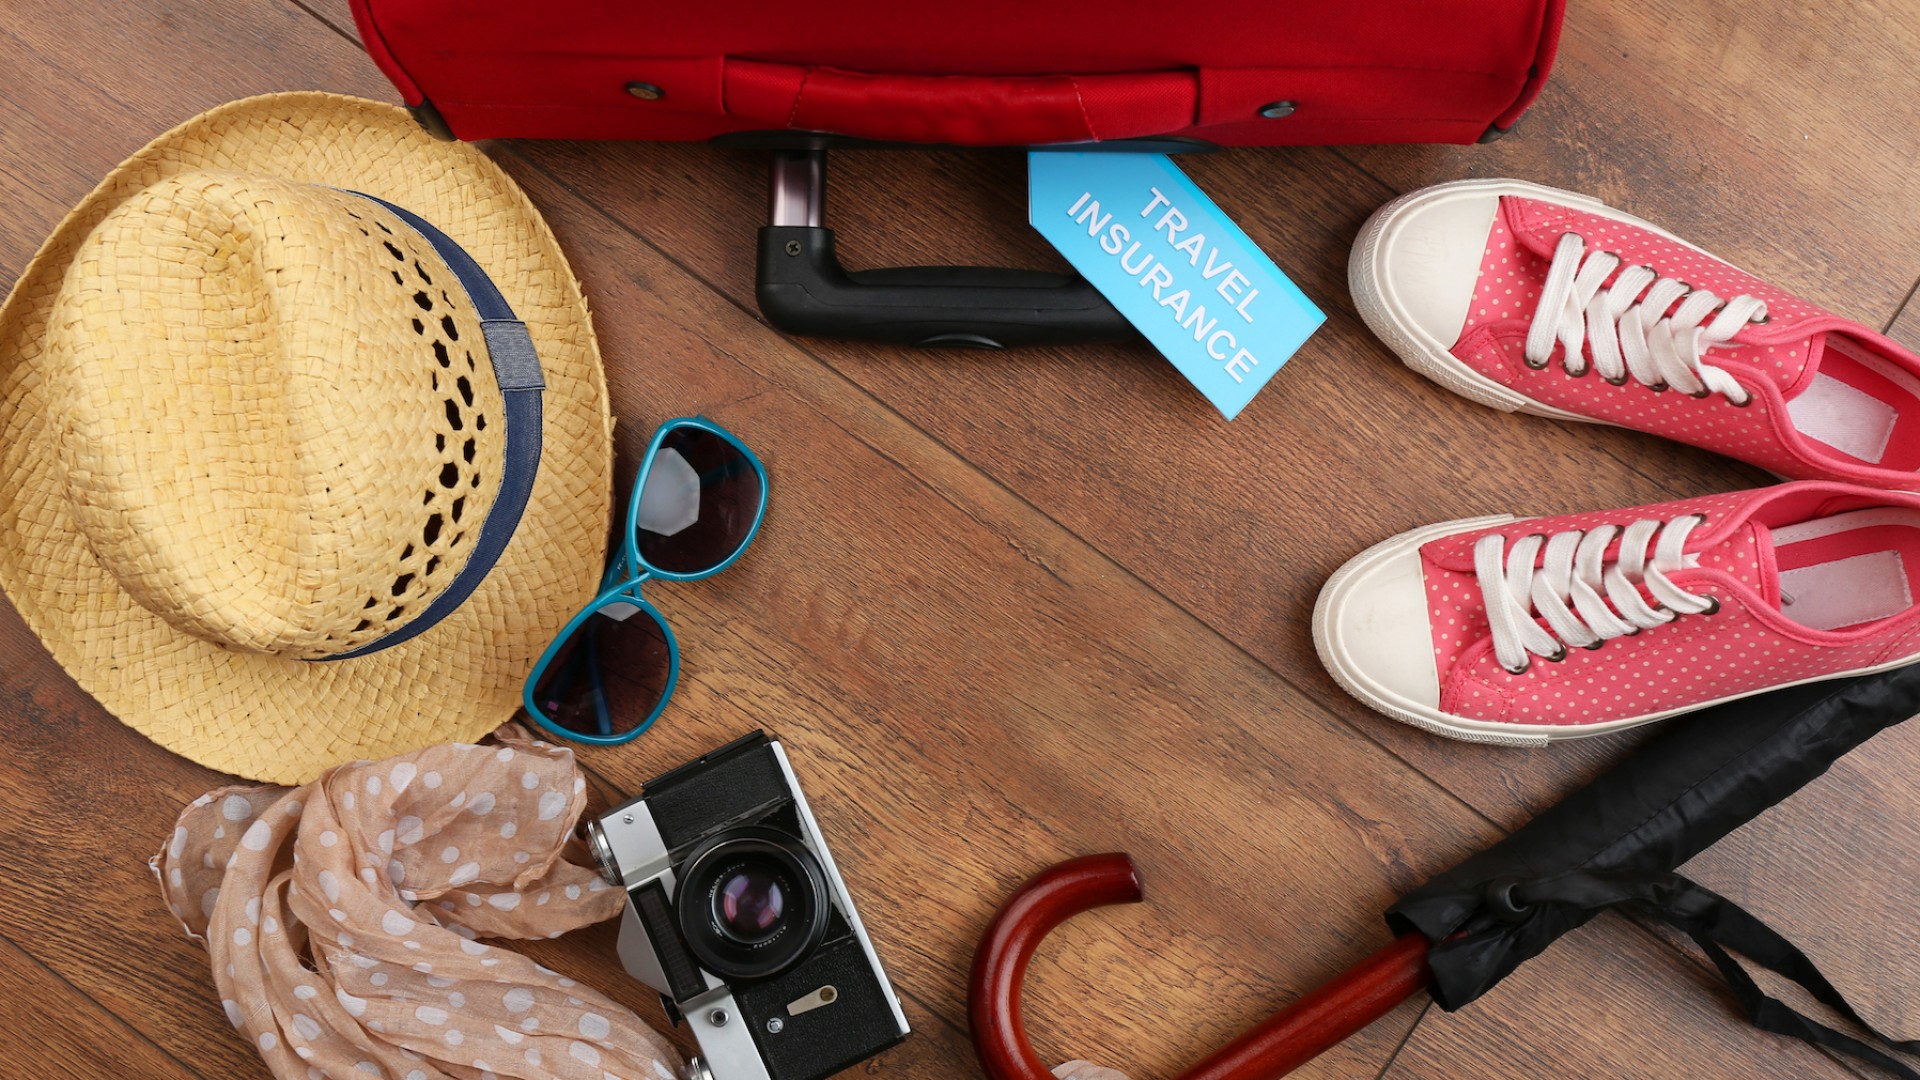 A suitcase, sun hat, sunglasses, camera, scarf, and a pair of shoes laid out on hard wood floors